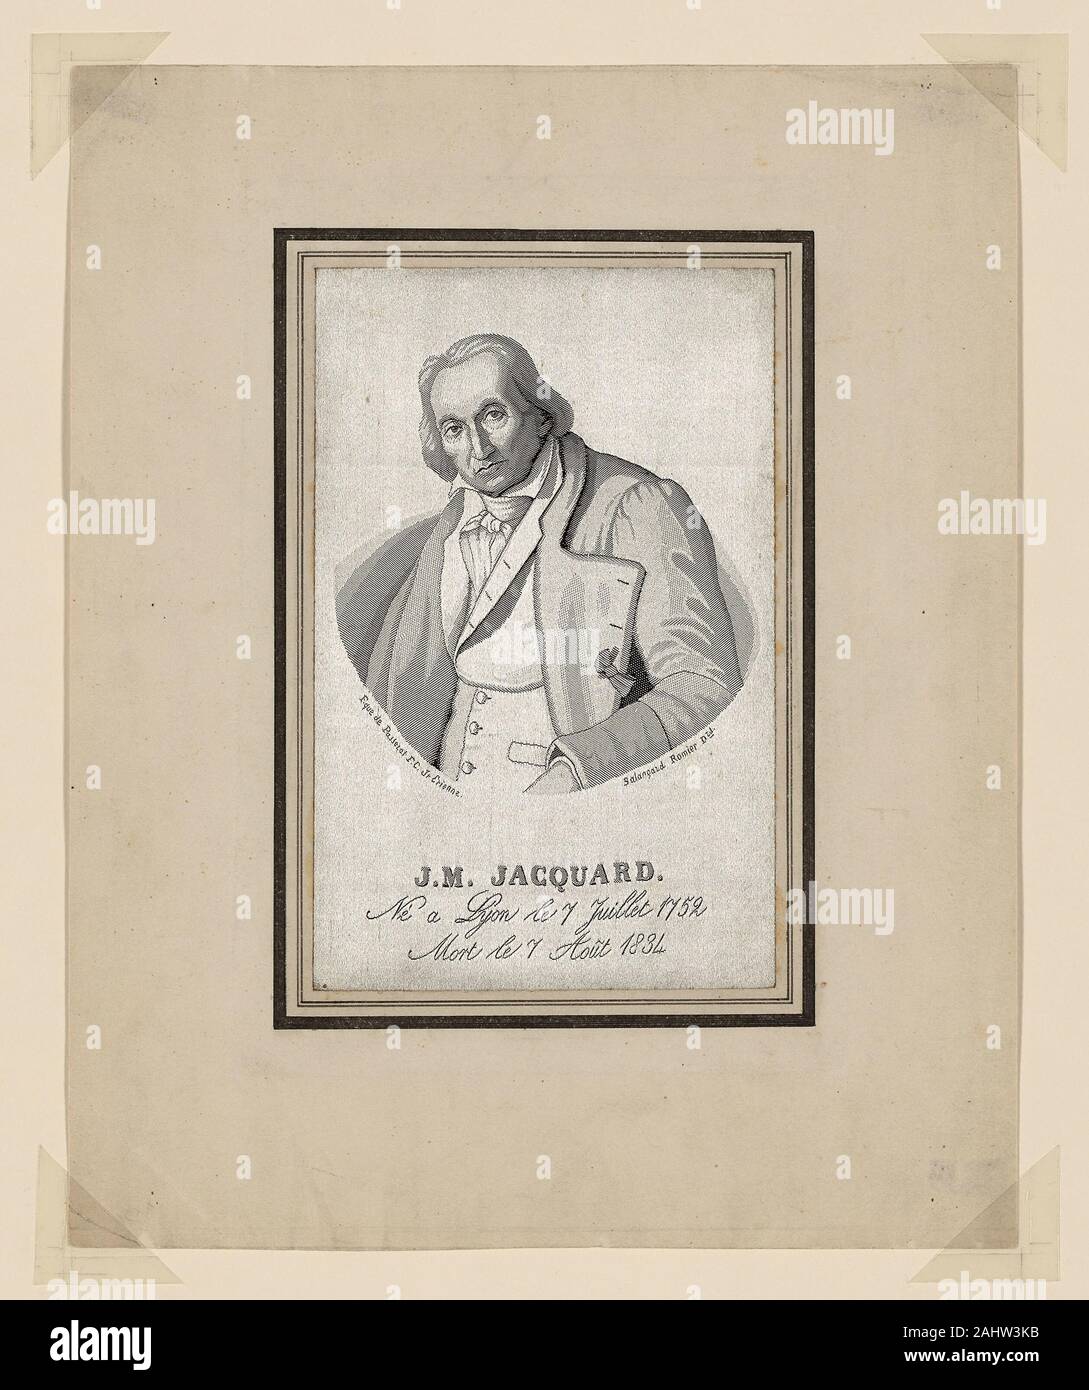 Claude Bonnefond (Engraver). Portrait of Joseph Marie Jacquard (1752–1834). 1801–1900. France. Silk, warp float-faced 10 1 satin weave self-patterned by main warp and ground weft floats and by areas of twill weaves; woven on loom with Jacquard attachment Stock Photo